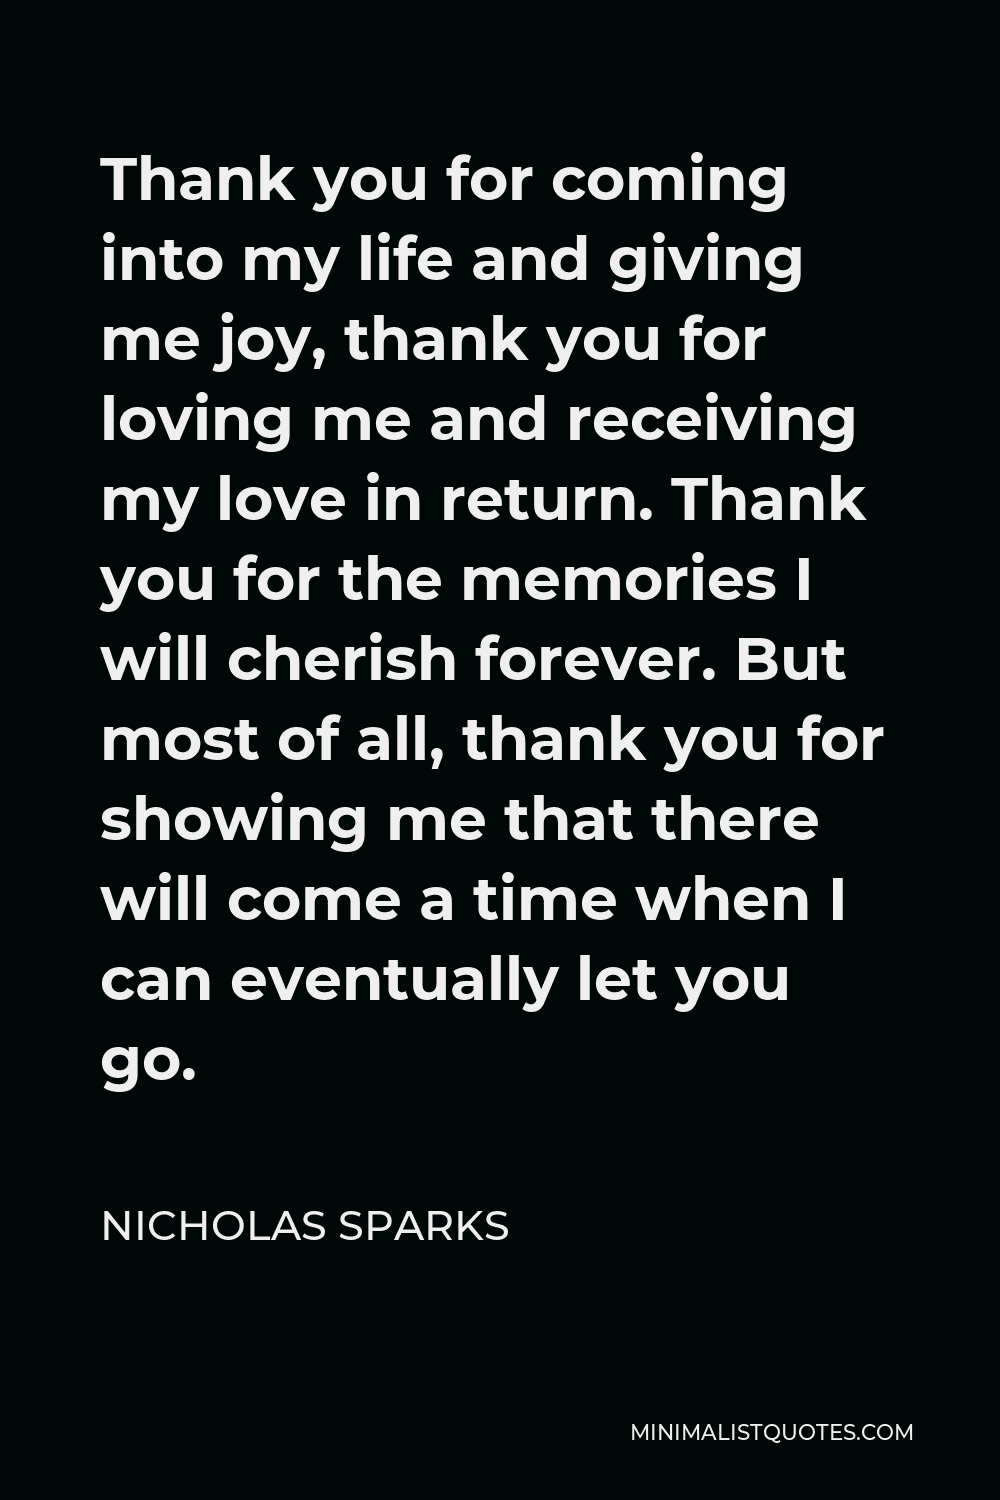 Nicholas Sparks Quote - Thank you for coming into my life and giving me joy, thank you for loving me and receiving my love in return. Thank you for the memories I will cherish forever. But most of all, thank you for showing me that there will come a time when I can eventually let you go.